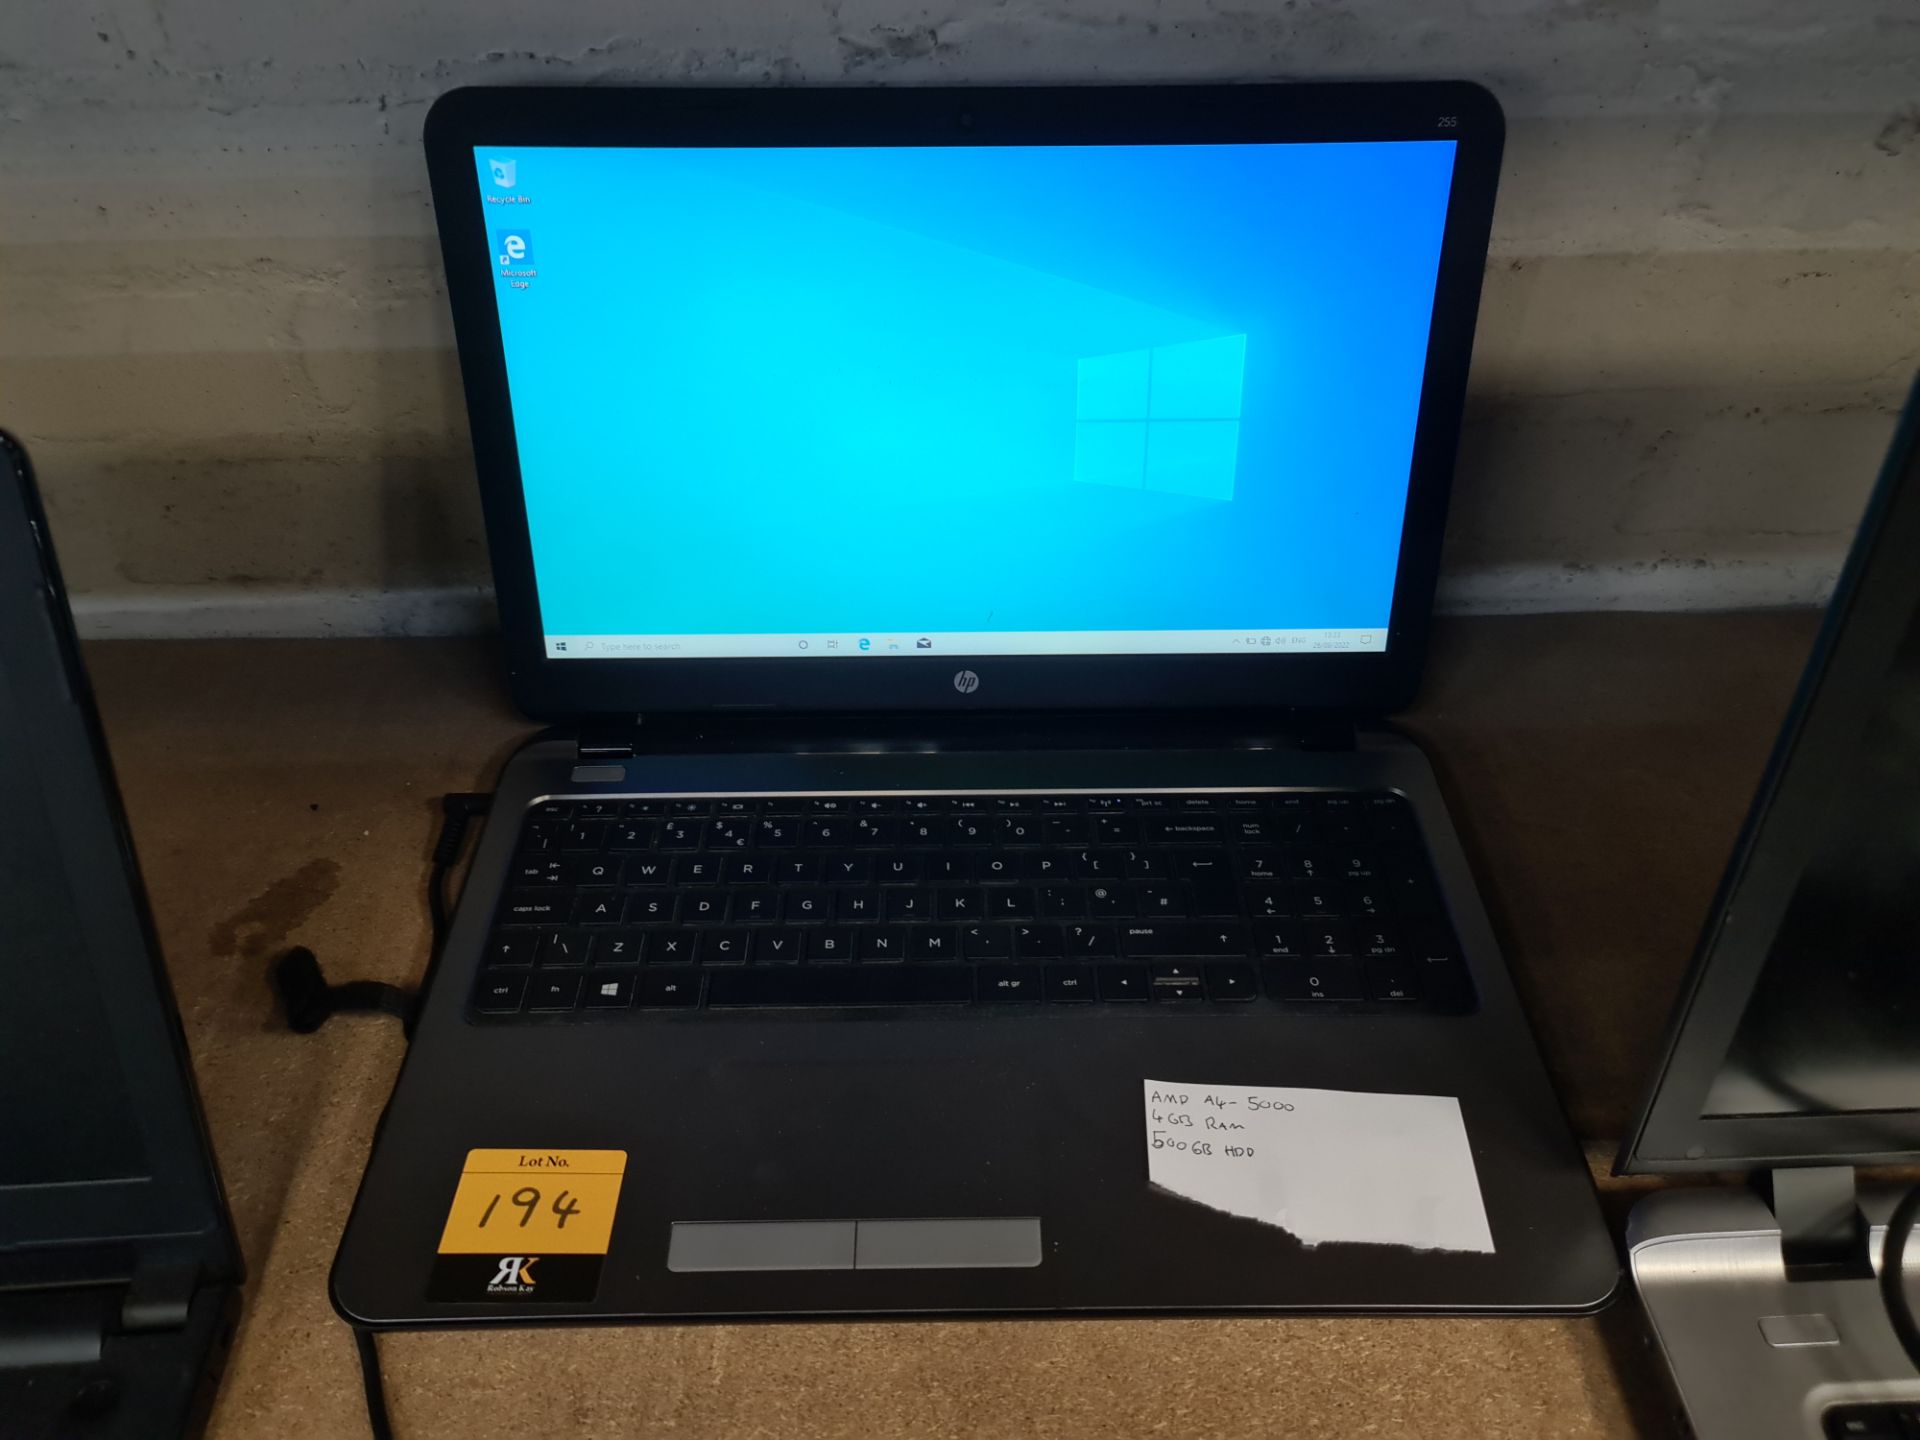 HP notebook computer with AMD A4-5000 processor, 4GB RAM, 500GB hard drive, etc. includes powerpack/